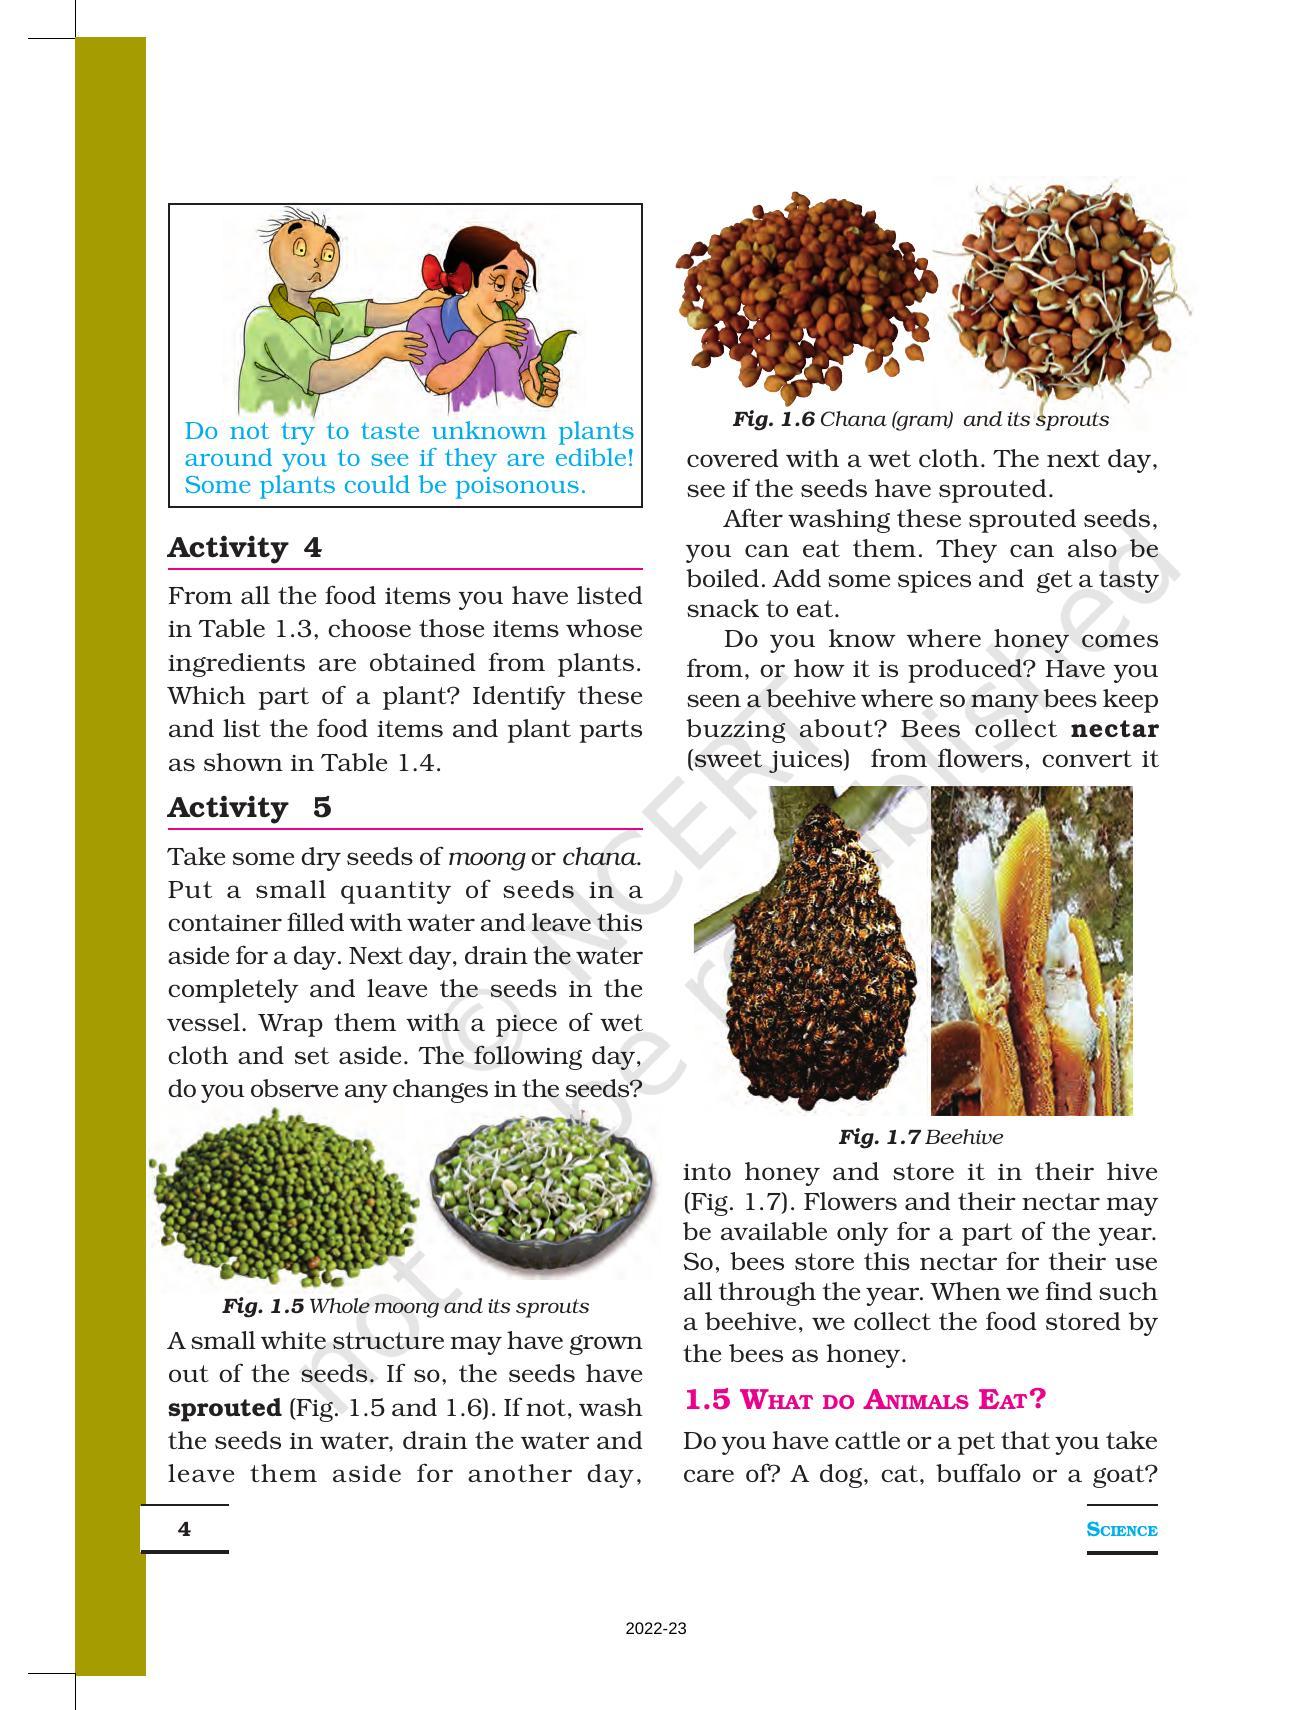 NCERT Book for Class 6 Science: Chapter 1-Food, Where Does It Come From? - Page 4